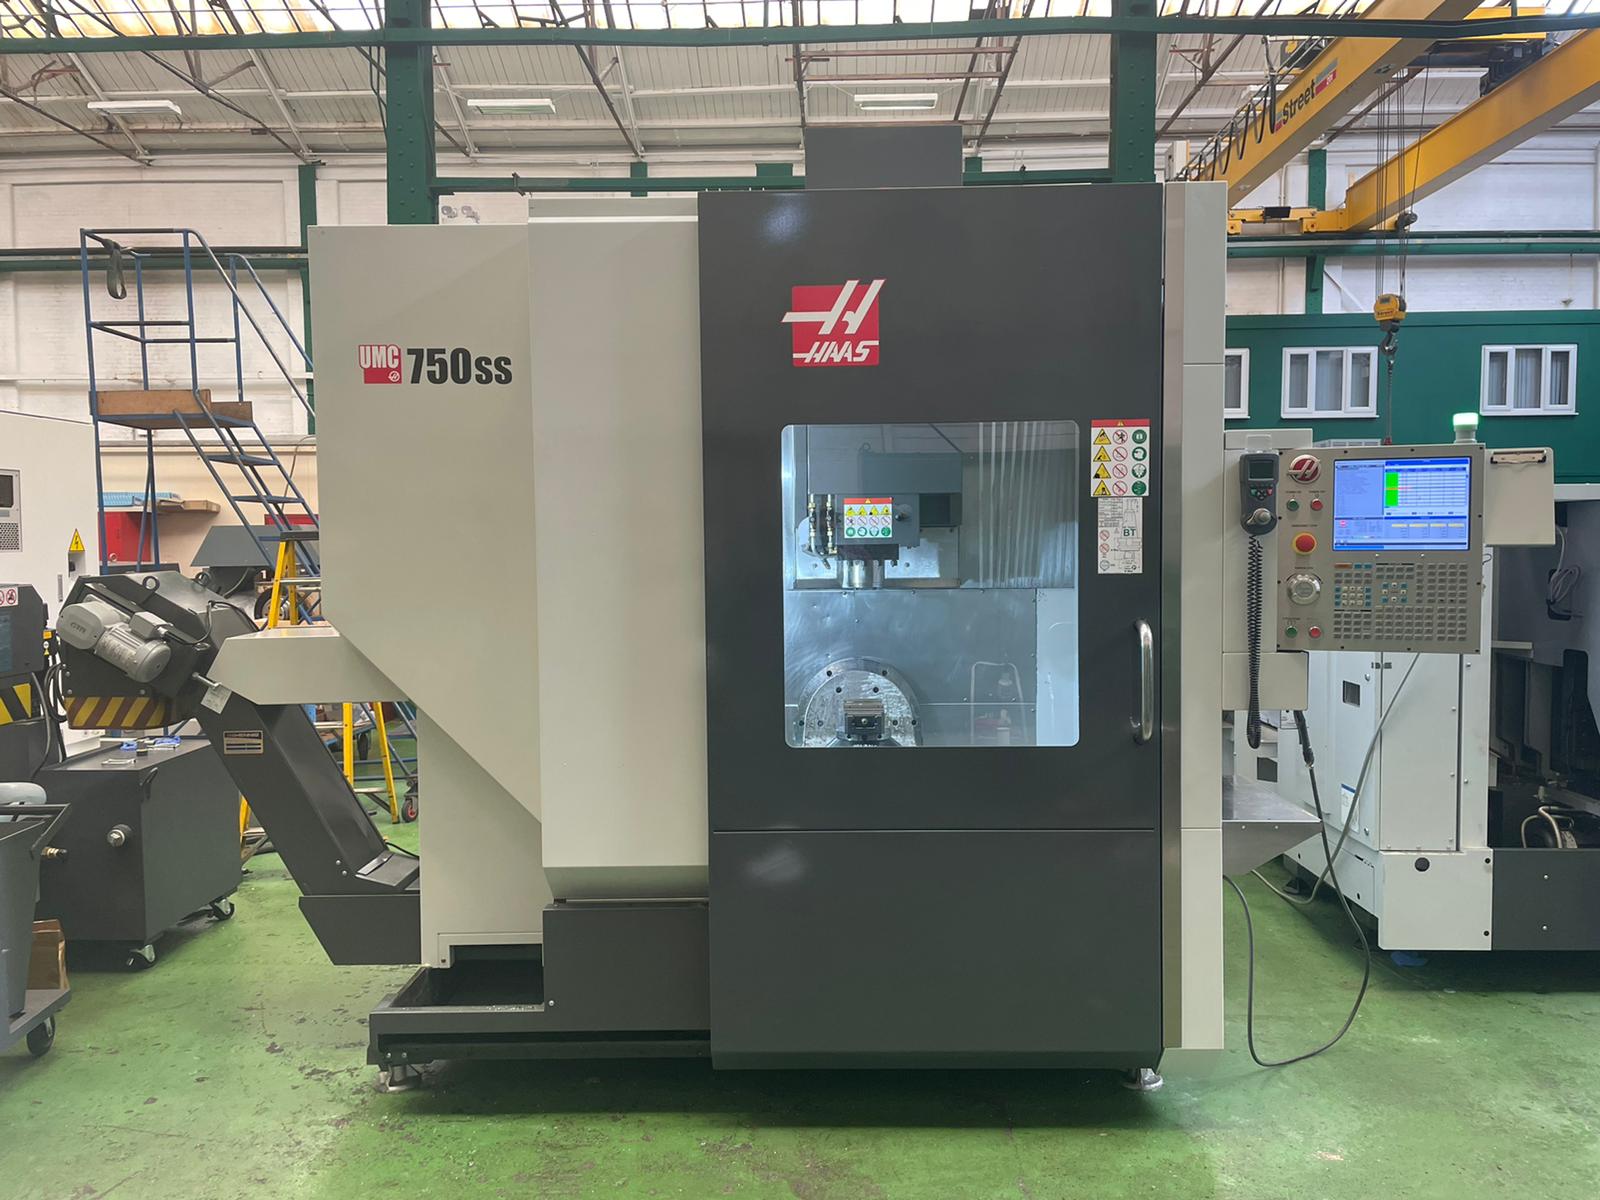 28942-HAAS-UMC-750SS-5-Axis-Machining-Centre-with-HAAS-Control.-Year-2017.jpg